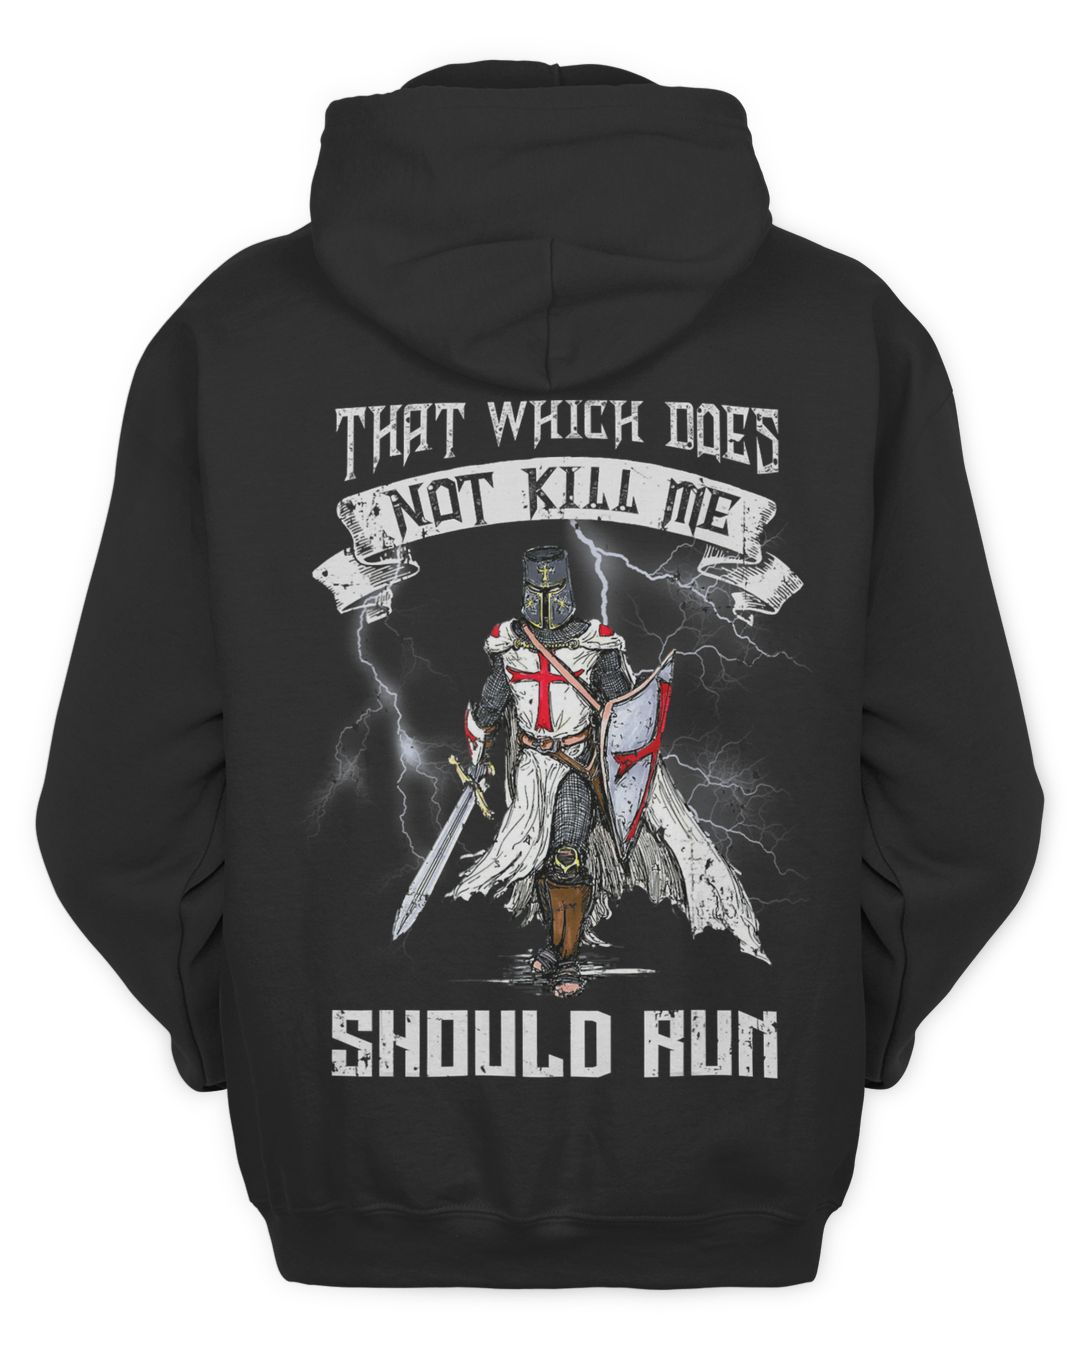 Knights Templar Hoodie - That Which Does Not Kill Me Should Run ...